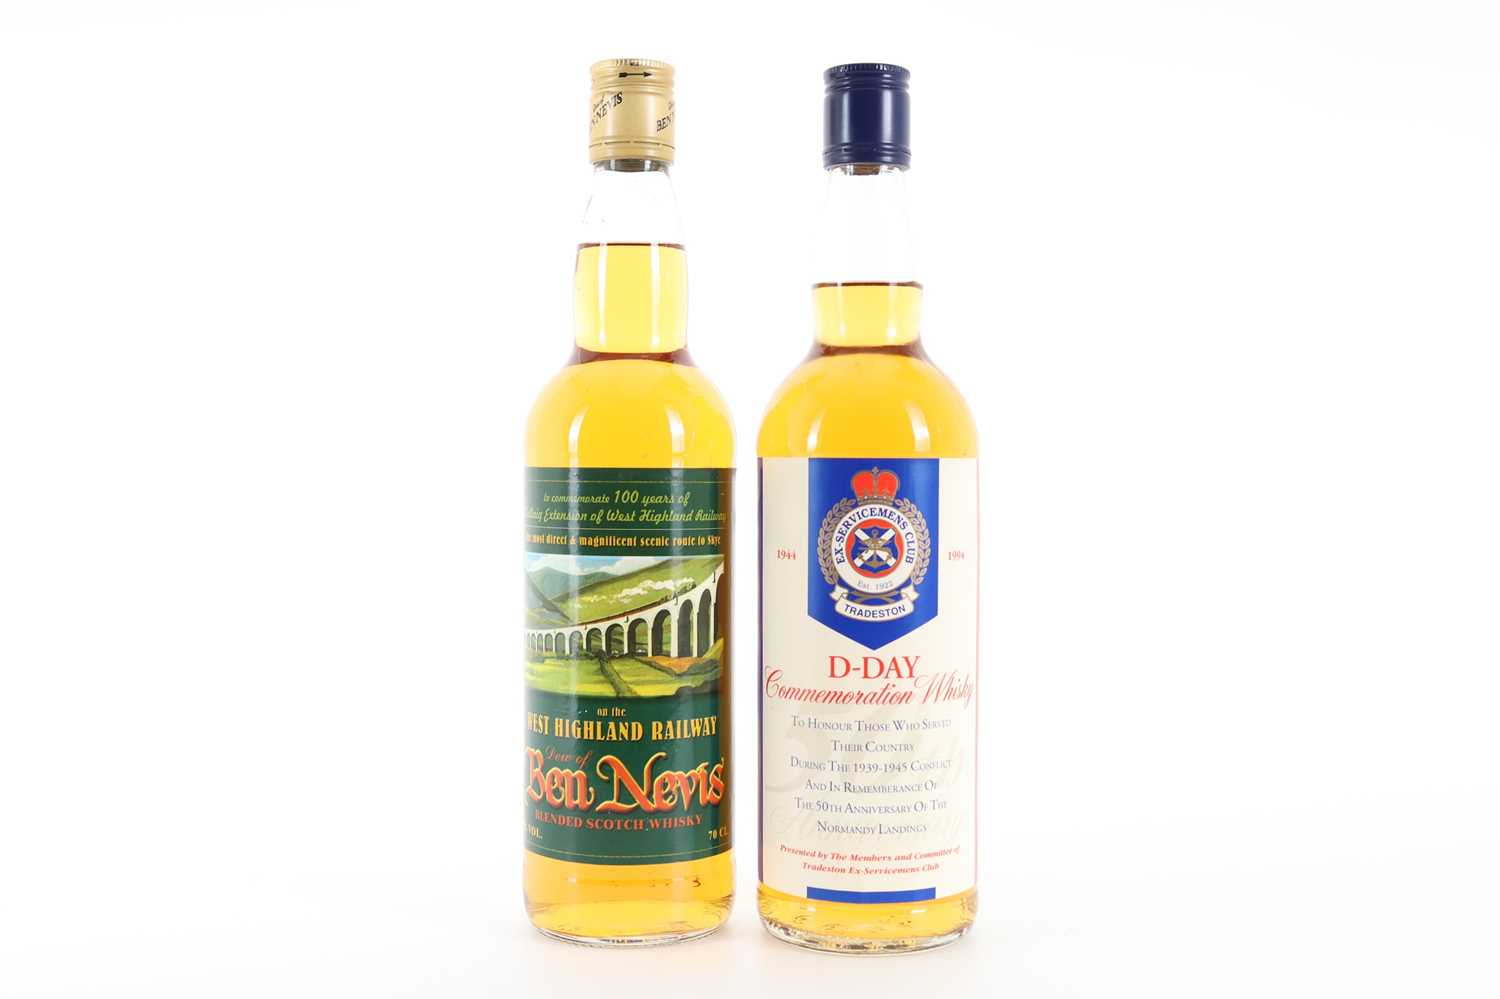 DEW OF BEN NEVIS WEST HIGHLAND RAILWAY AND D-DAY COMMEMORATION WHISKY BLENDED WHISKY